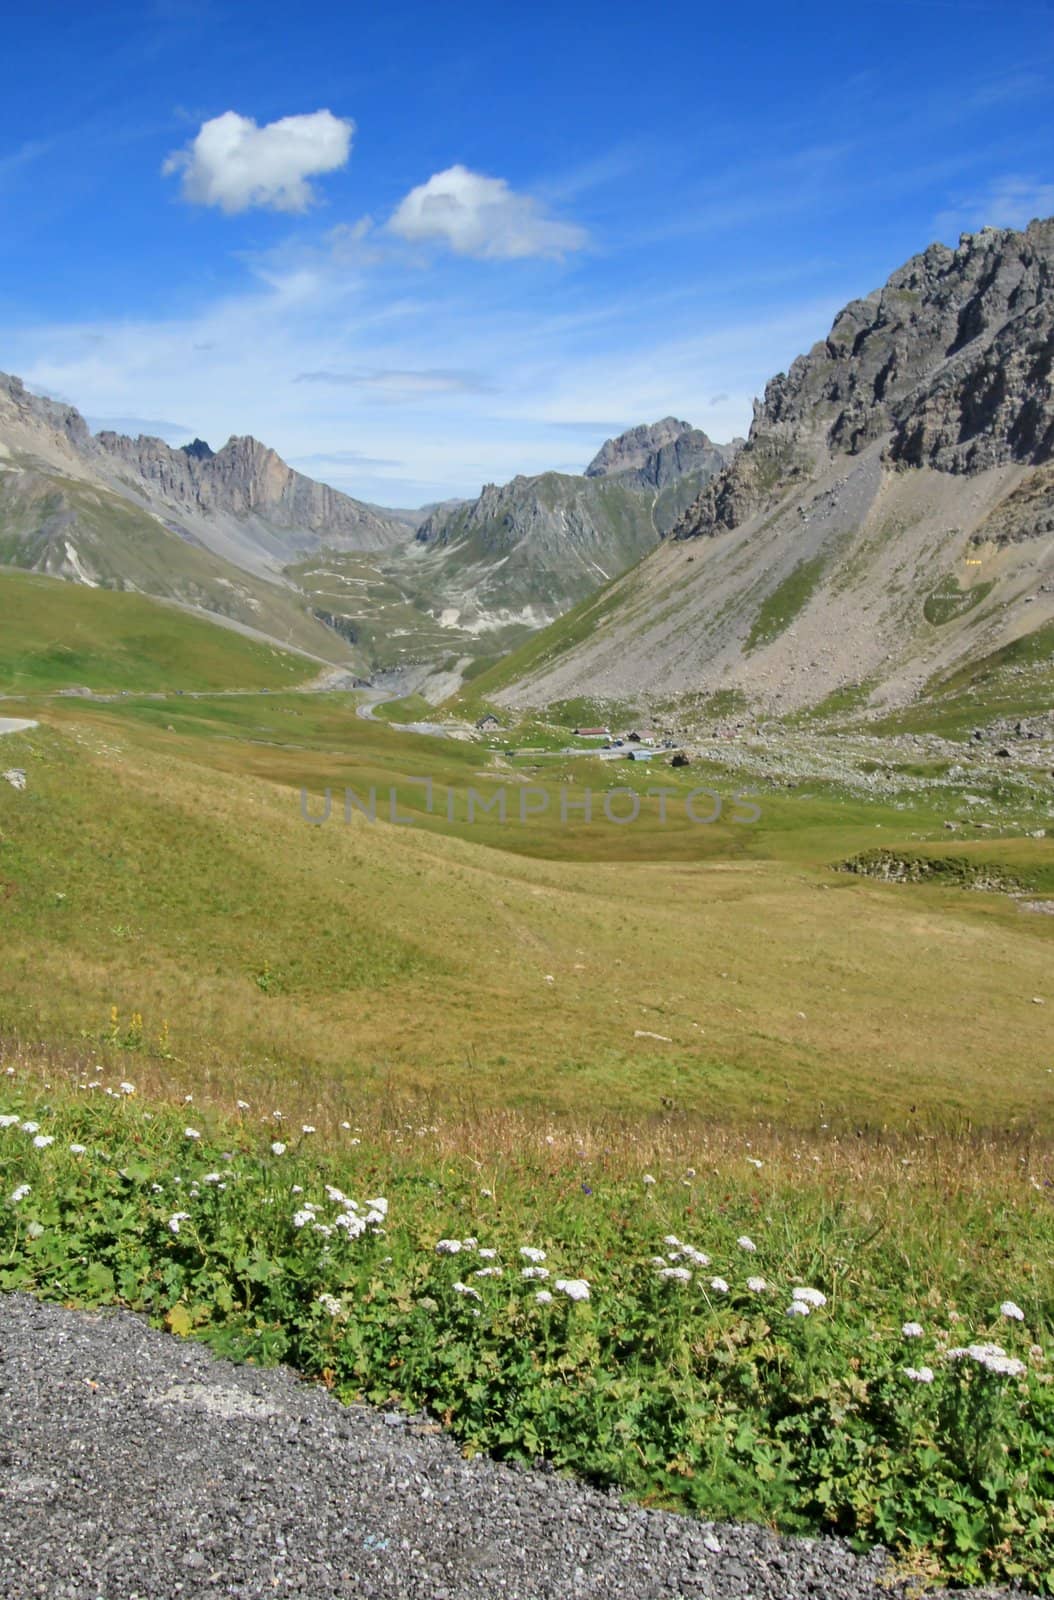 Landscape at the Galibier pass, France by Elenaphotos21